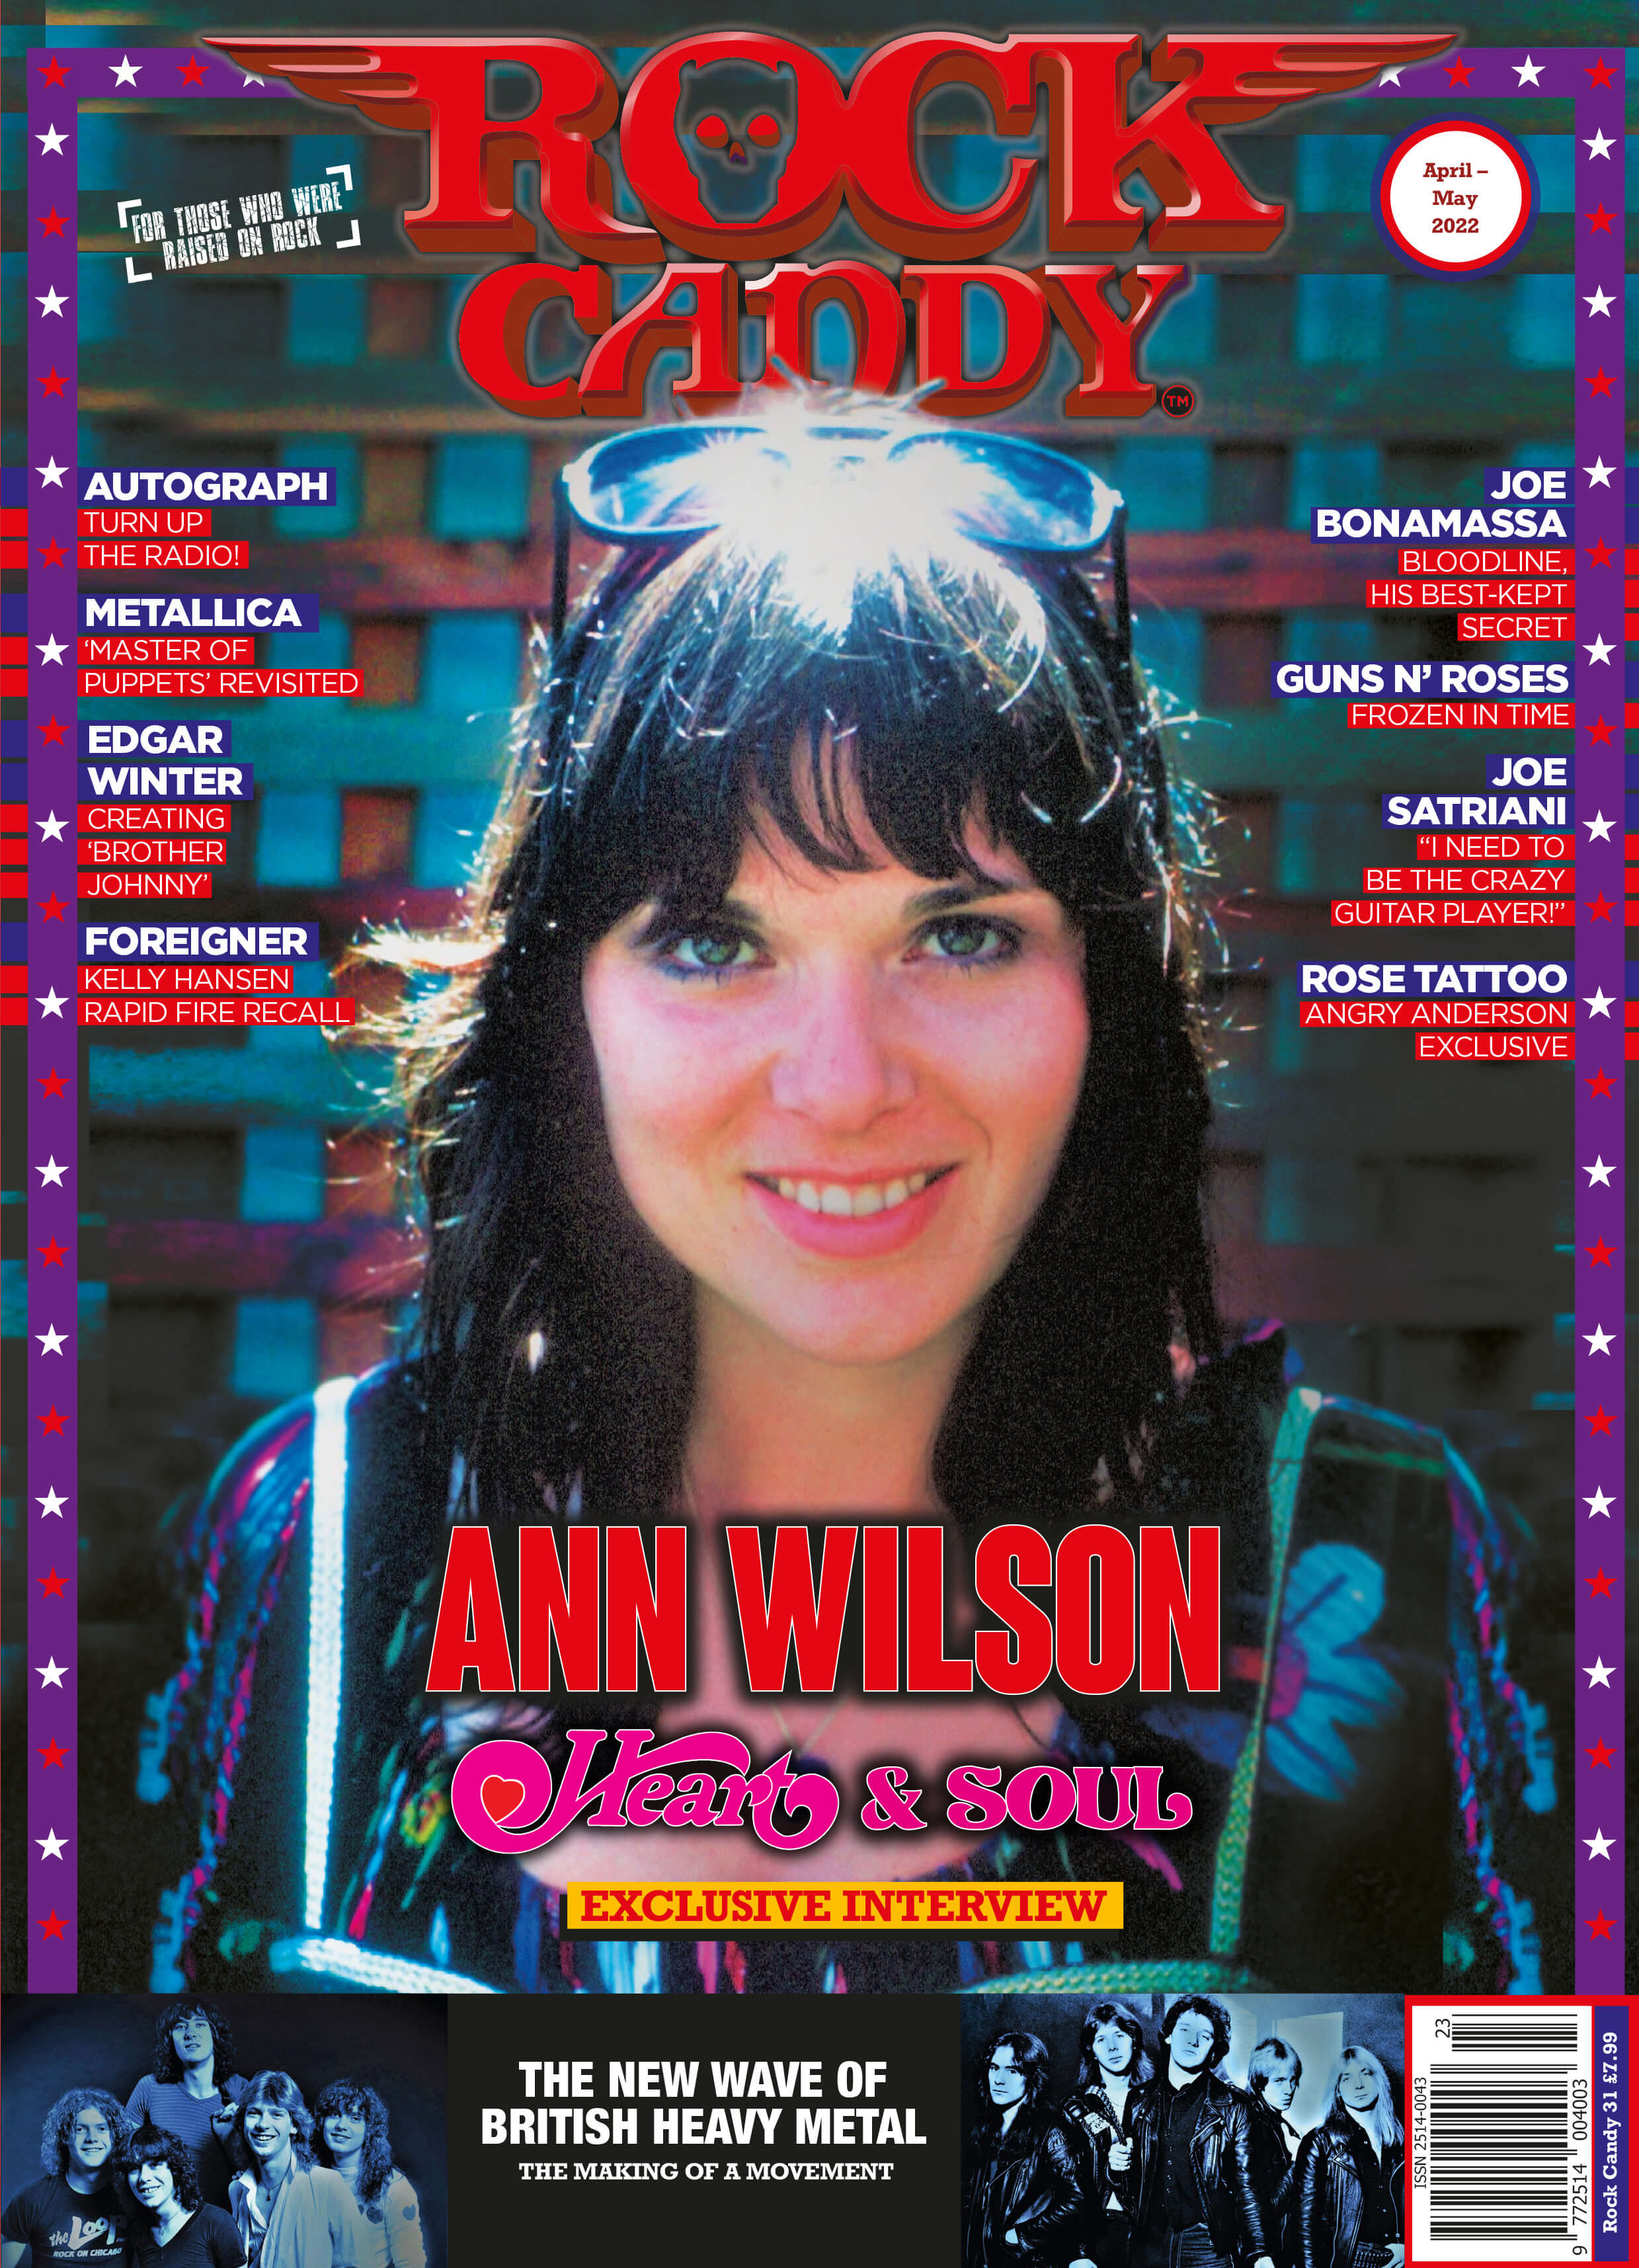 Issue 31 is available right now, featuring Ann Wilson on the cover discussing her incredible career, her new solo album, and the future of Heart.